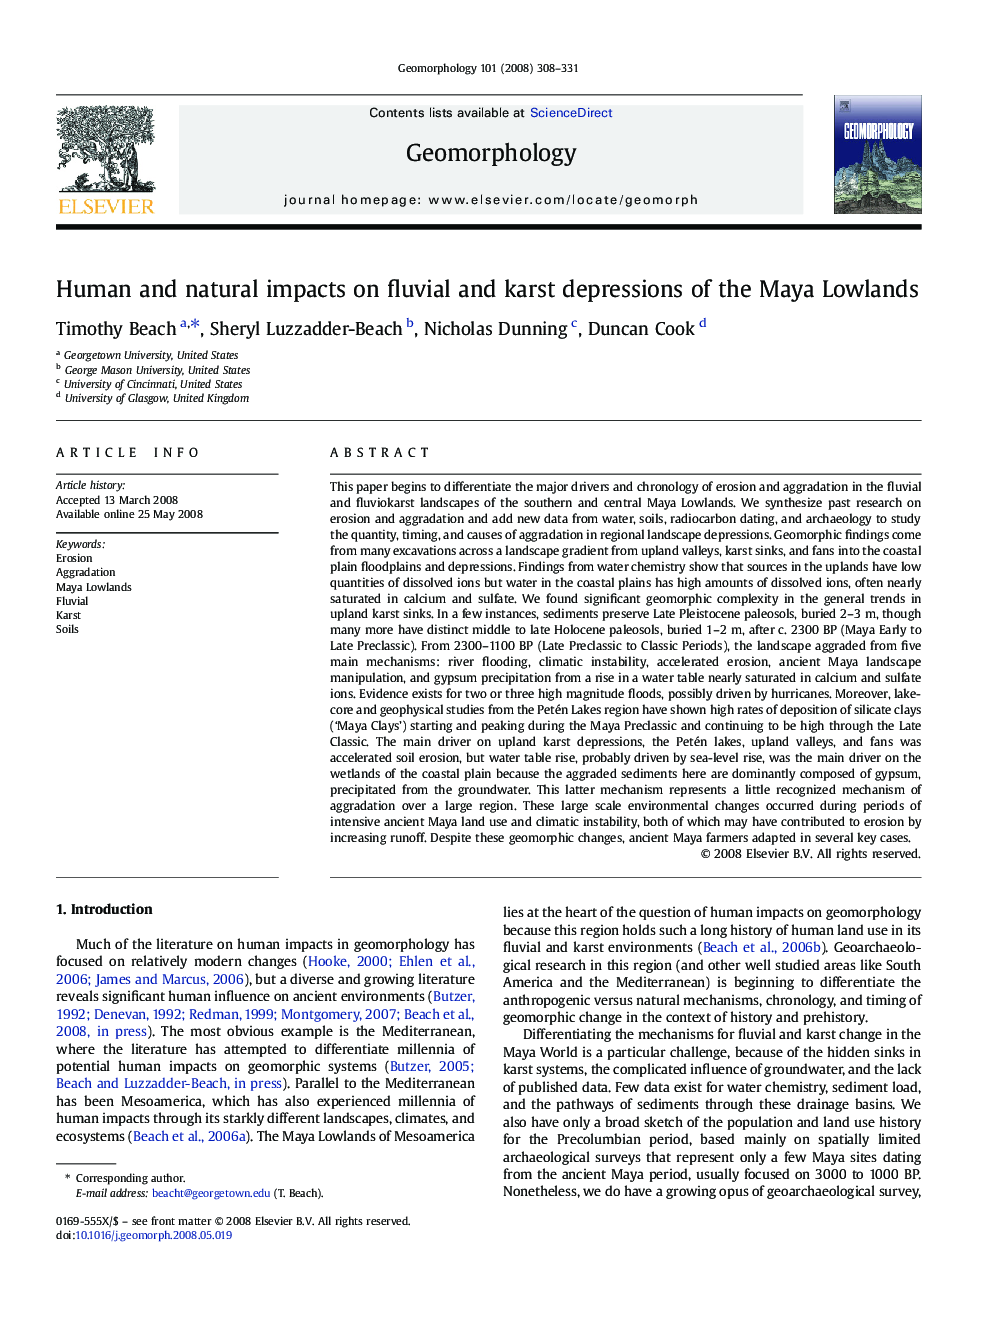 Human and natural impacts on fluvial and karst depressions of the Maya Lowlands